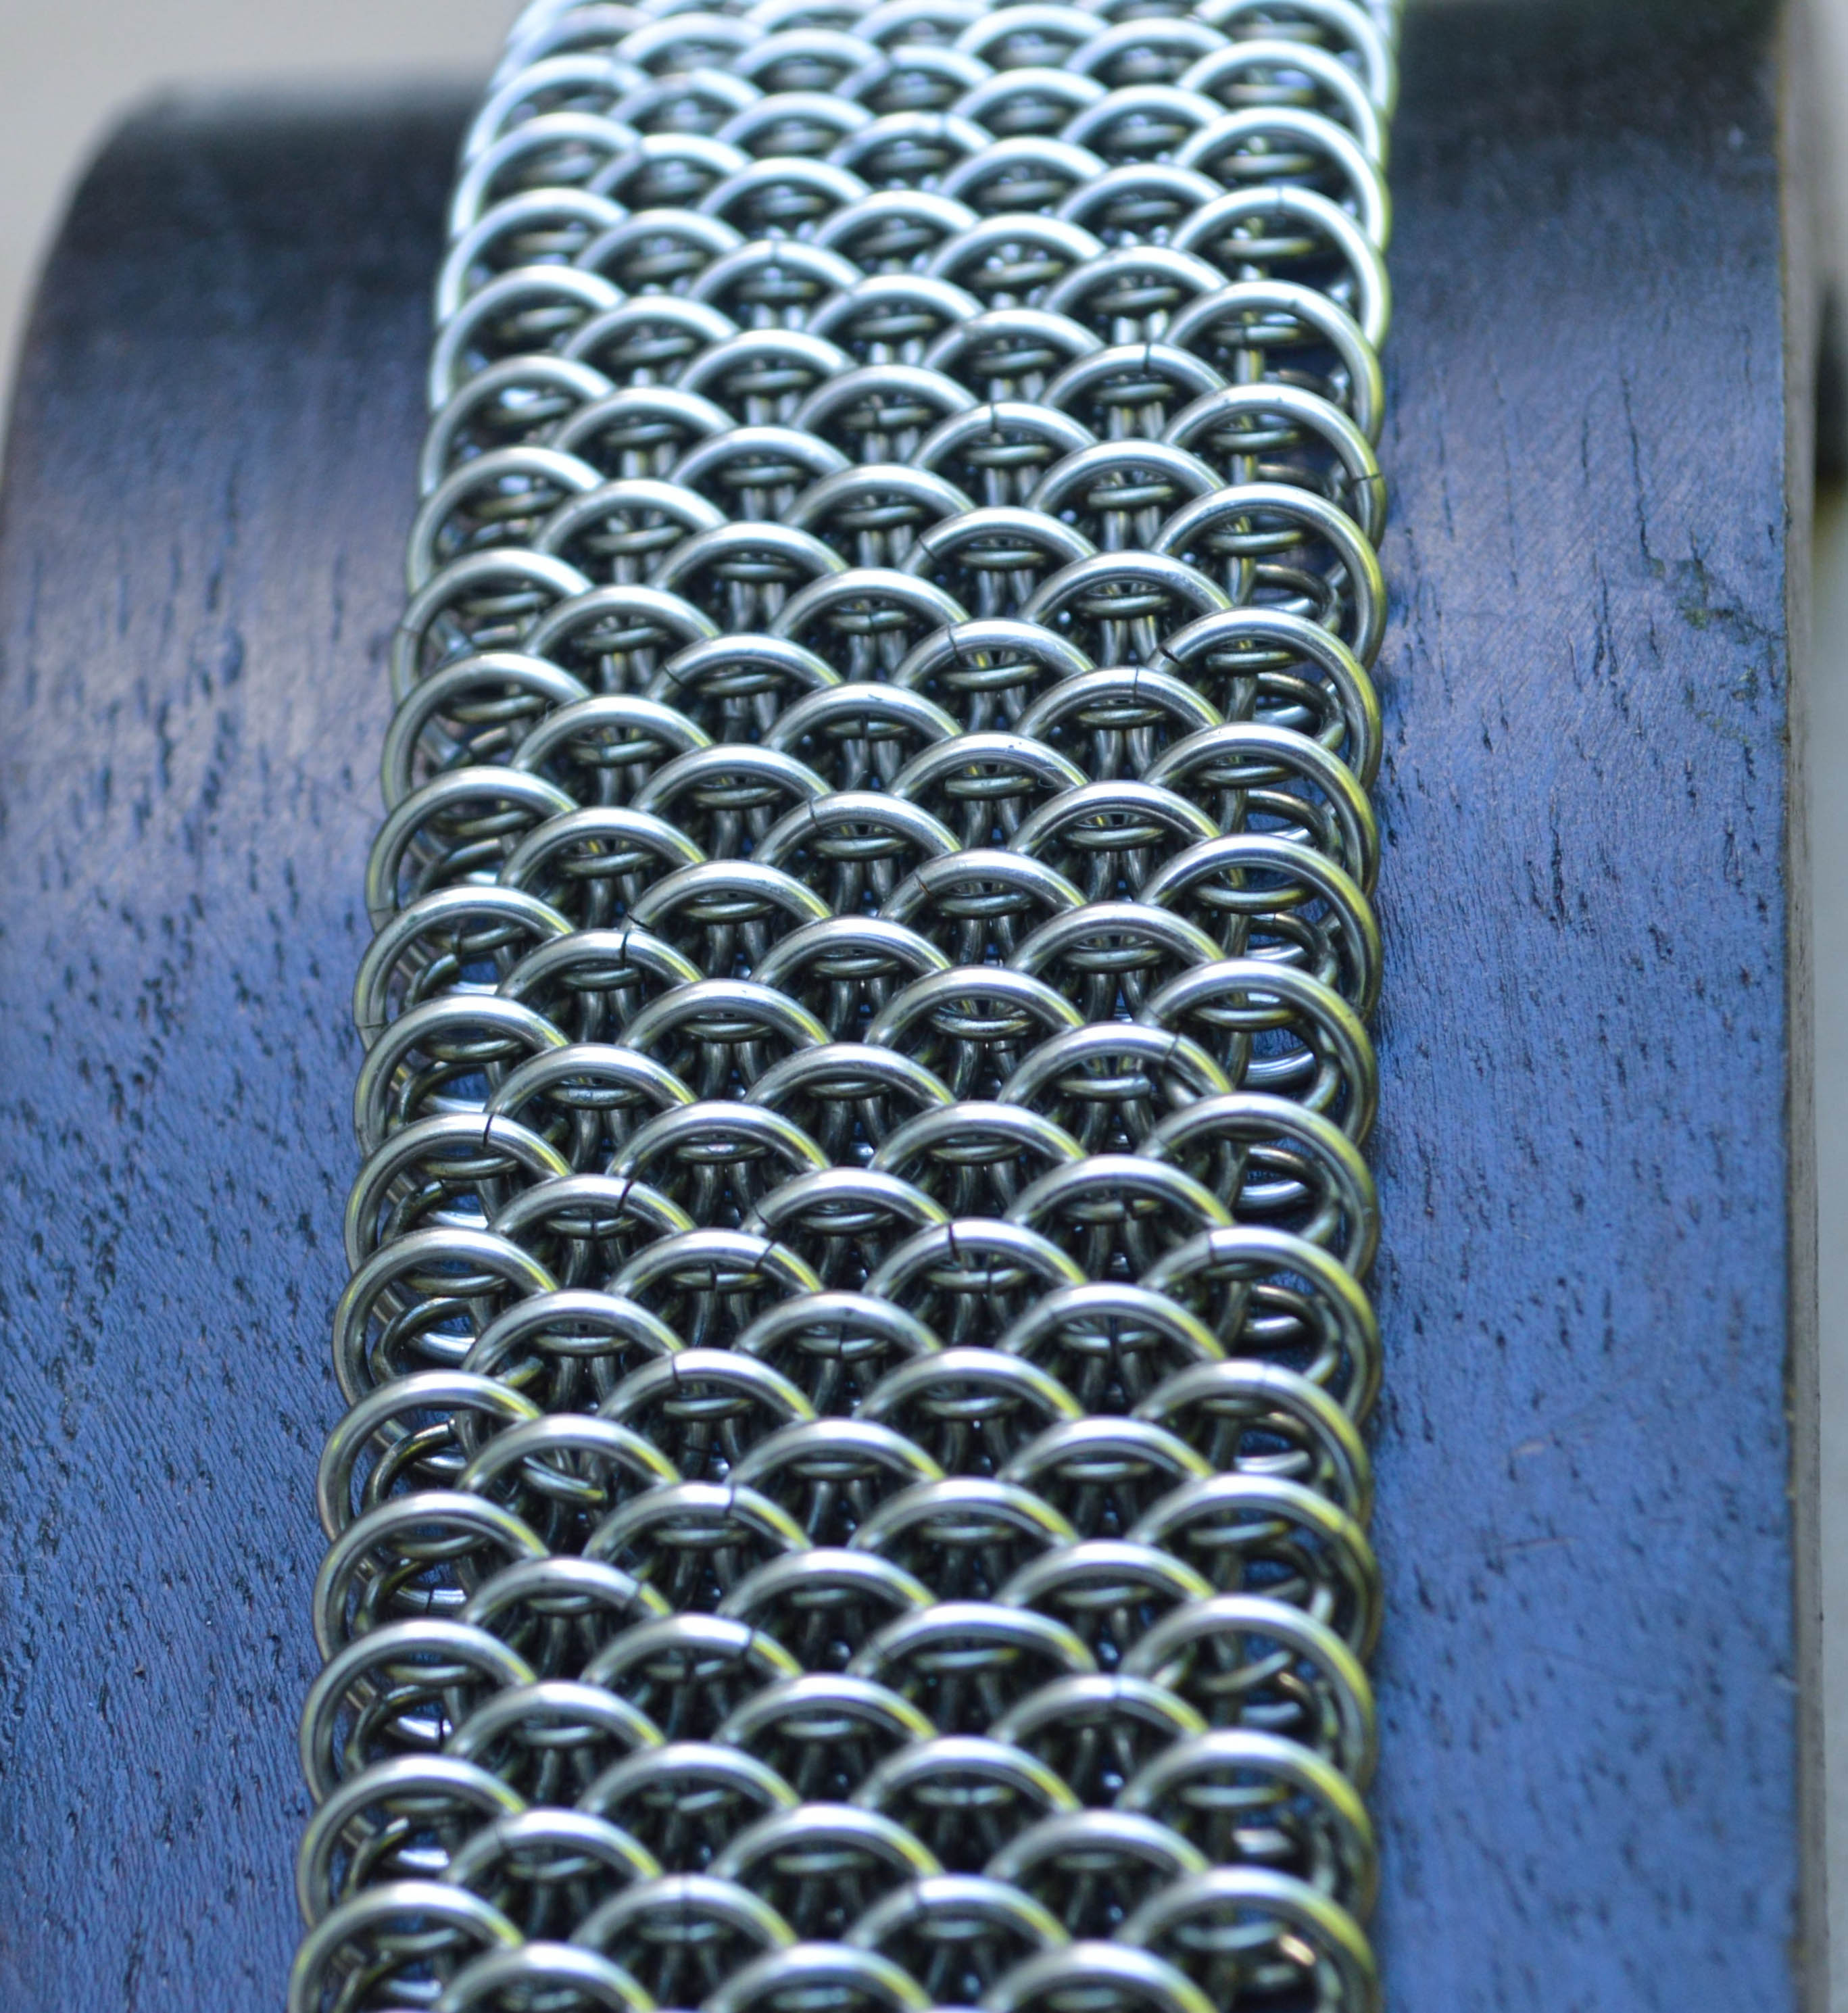 Dragoncale chainmaille weave with titanium enameled copper. 